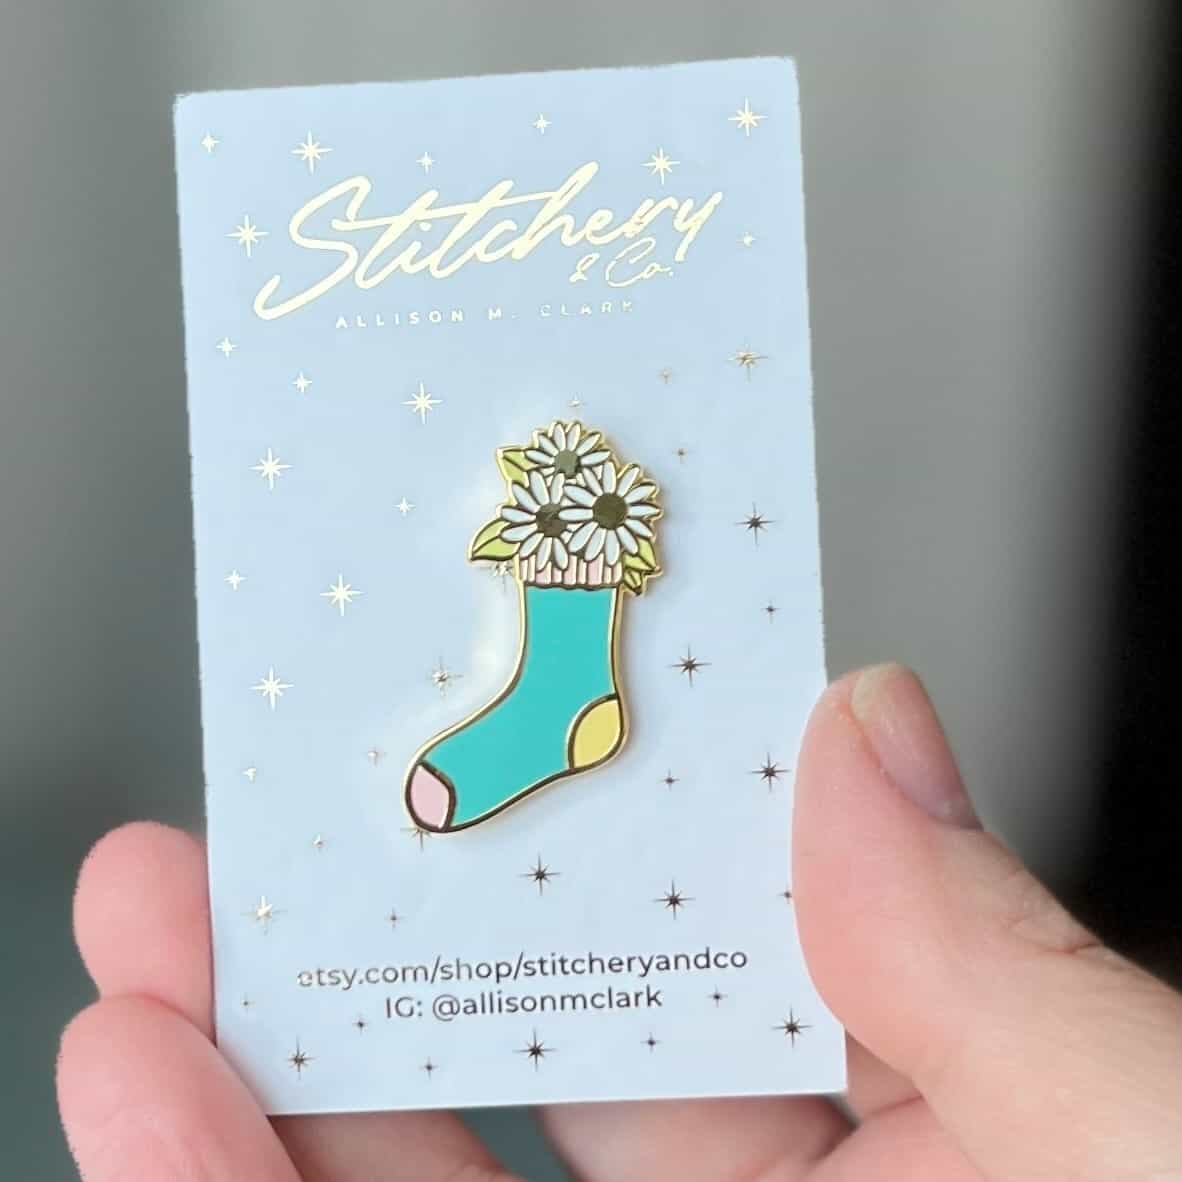 An enamel pin shaped like a sock with daisies inside it.